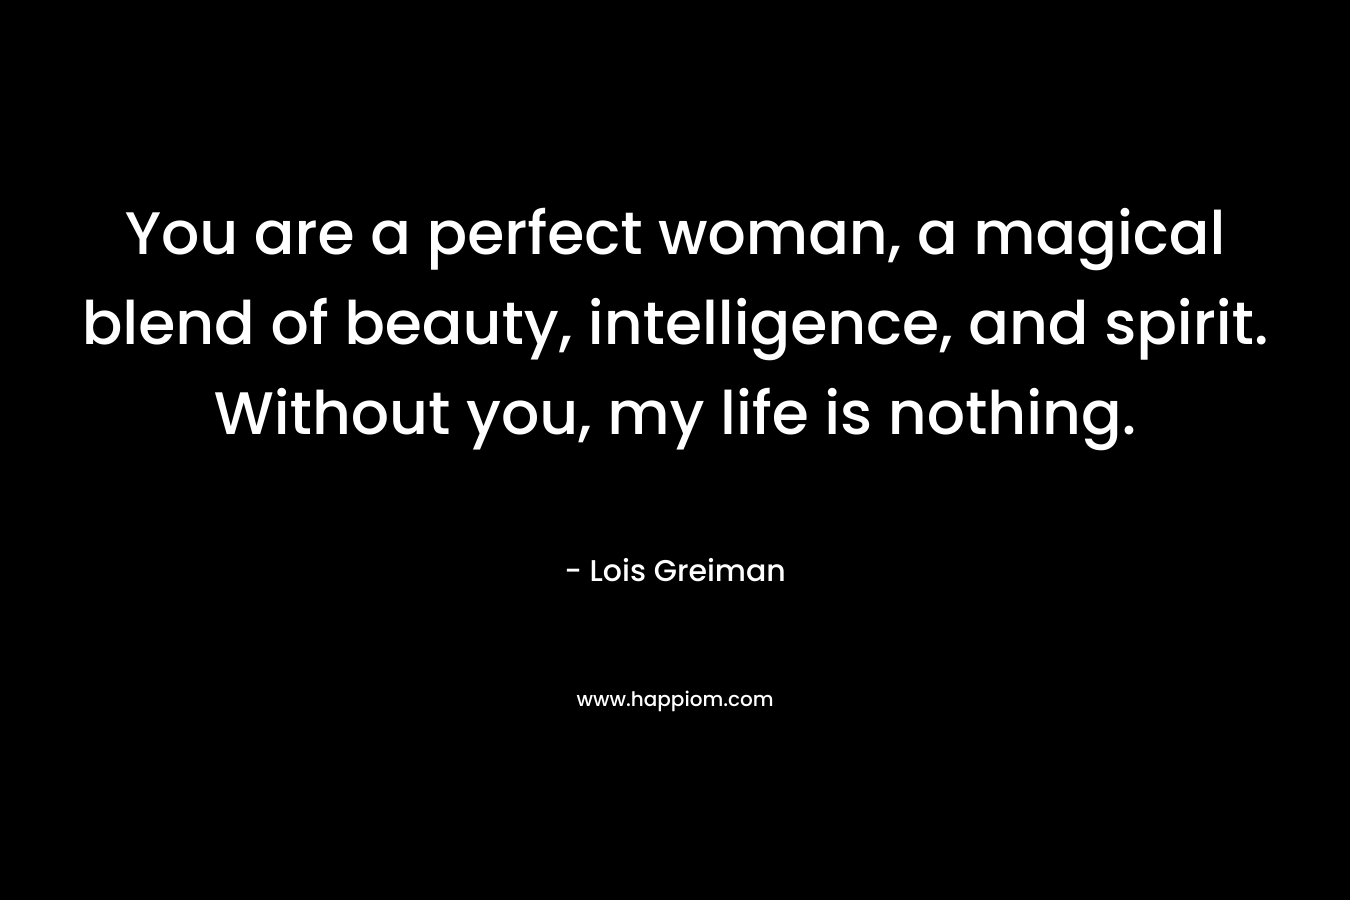 You are a perfect woman, a magical blend of beauty, intelligence, and spirit. Without you, my life is nothing. – Lois Greiman